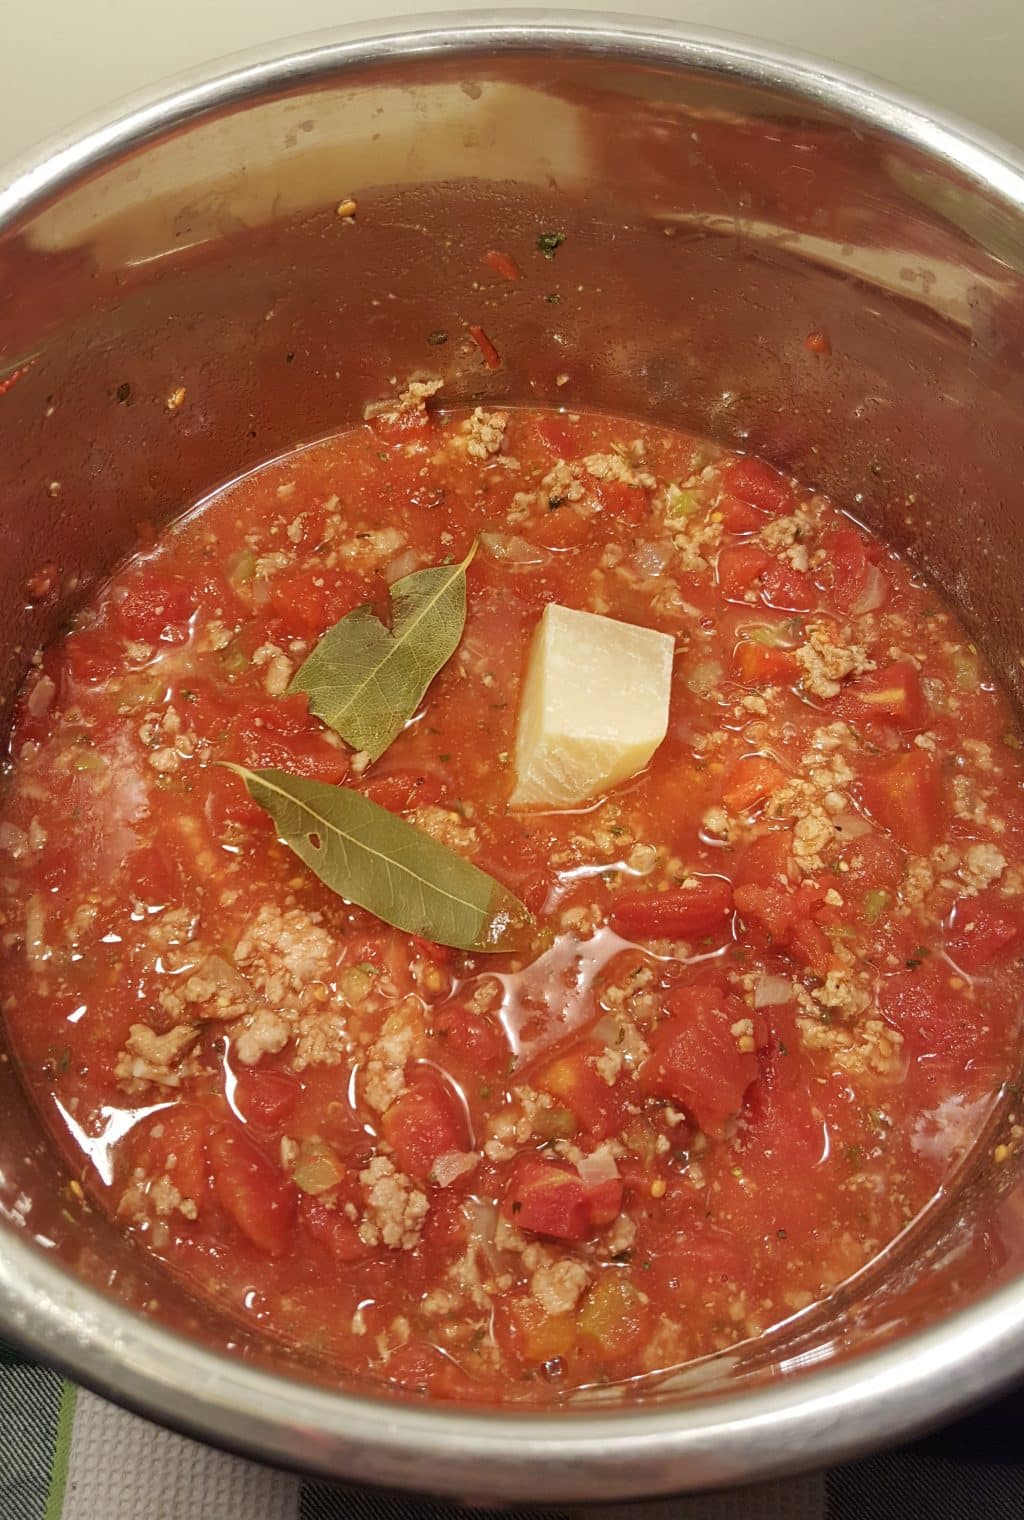 Add in the Bay Leaves and Parmesan Rind